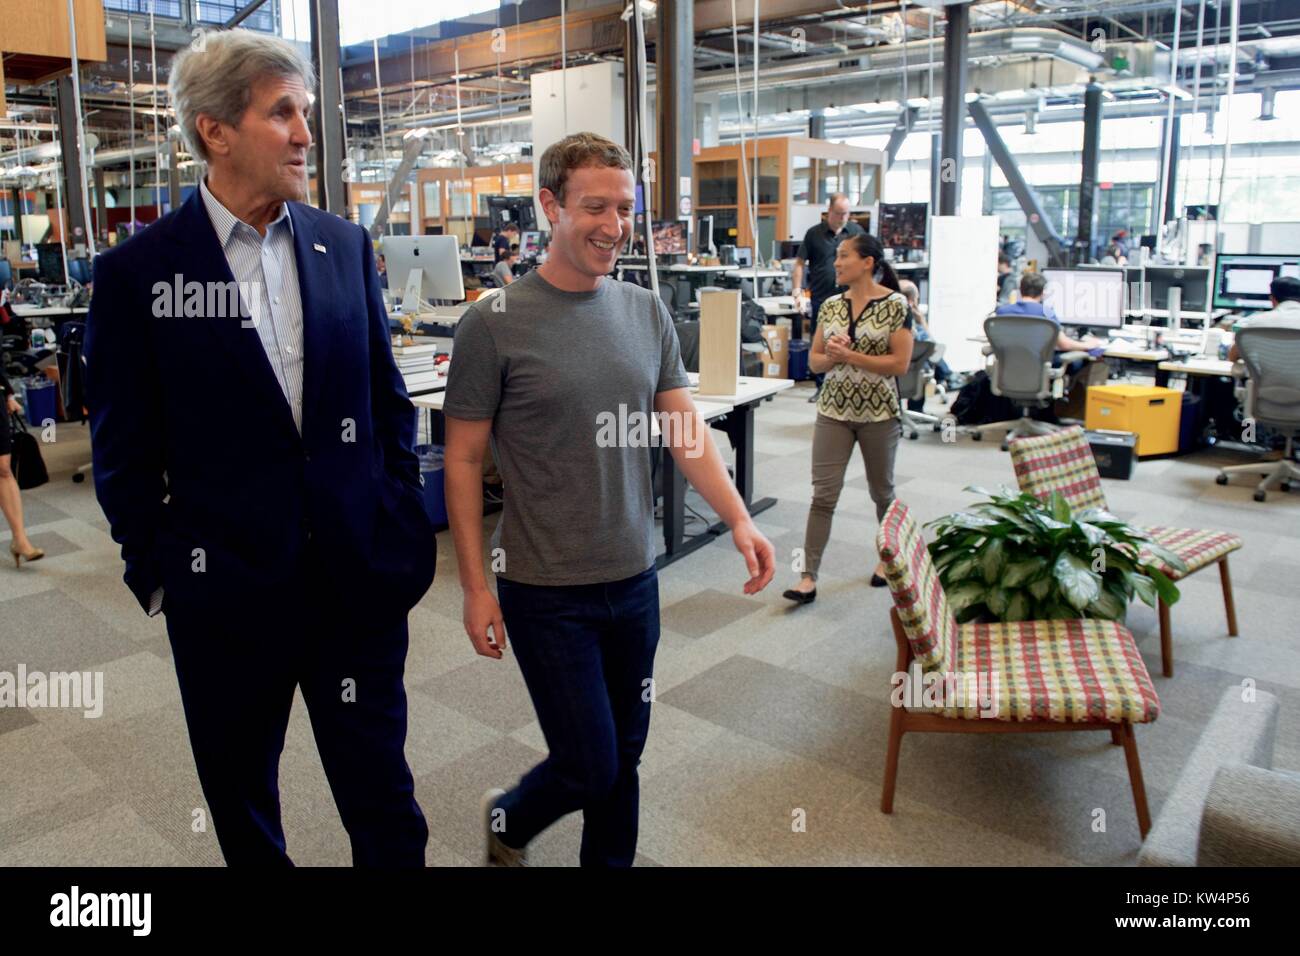 US Secretary of State John Kerry receiving a tour of Facebook headquarters from founder Mark Zuckerberg, Menlo Park, California, June 23, 2016. Image courtesy US Department of State. Stock Photo